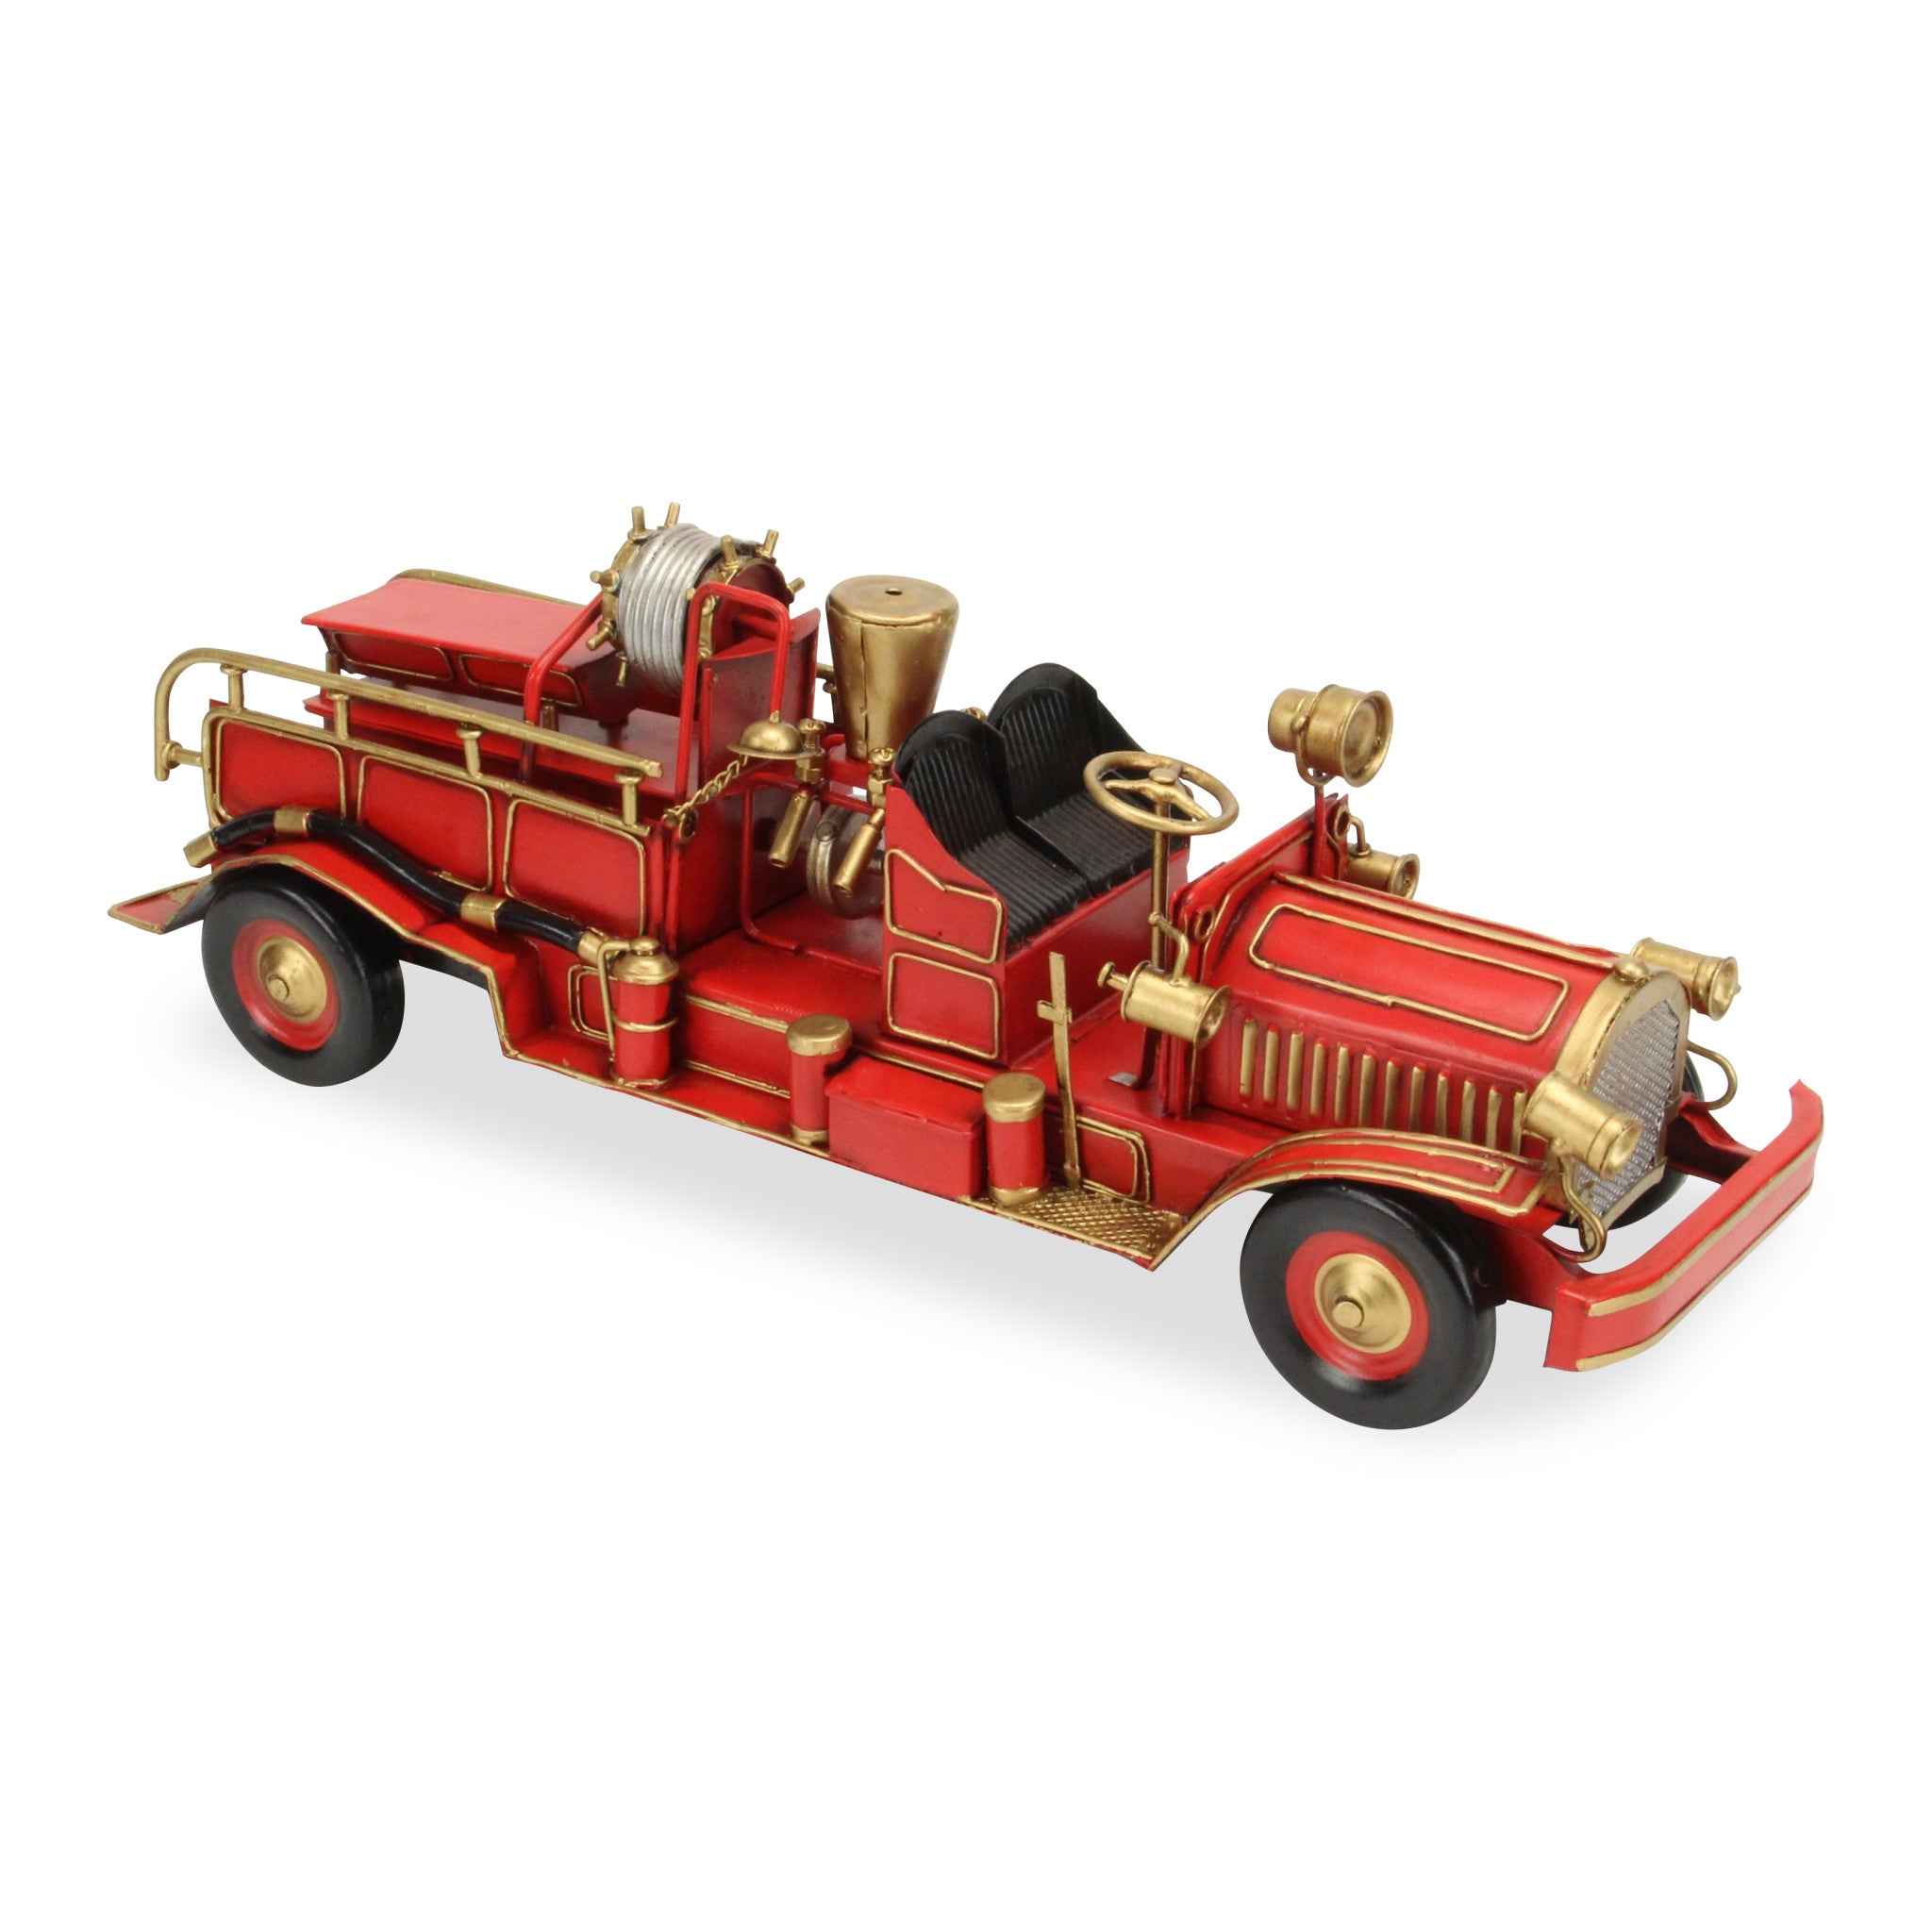 6" Red and Gold Metal Hand Painted Model Car